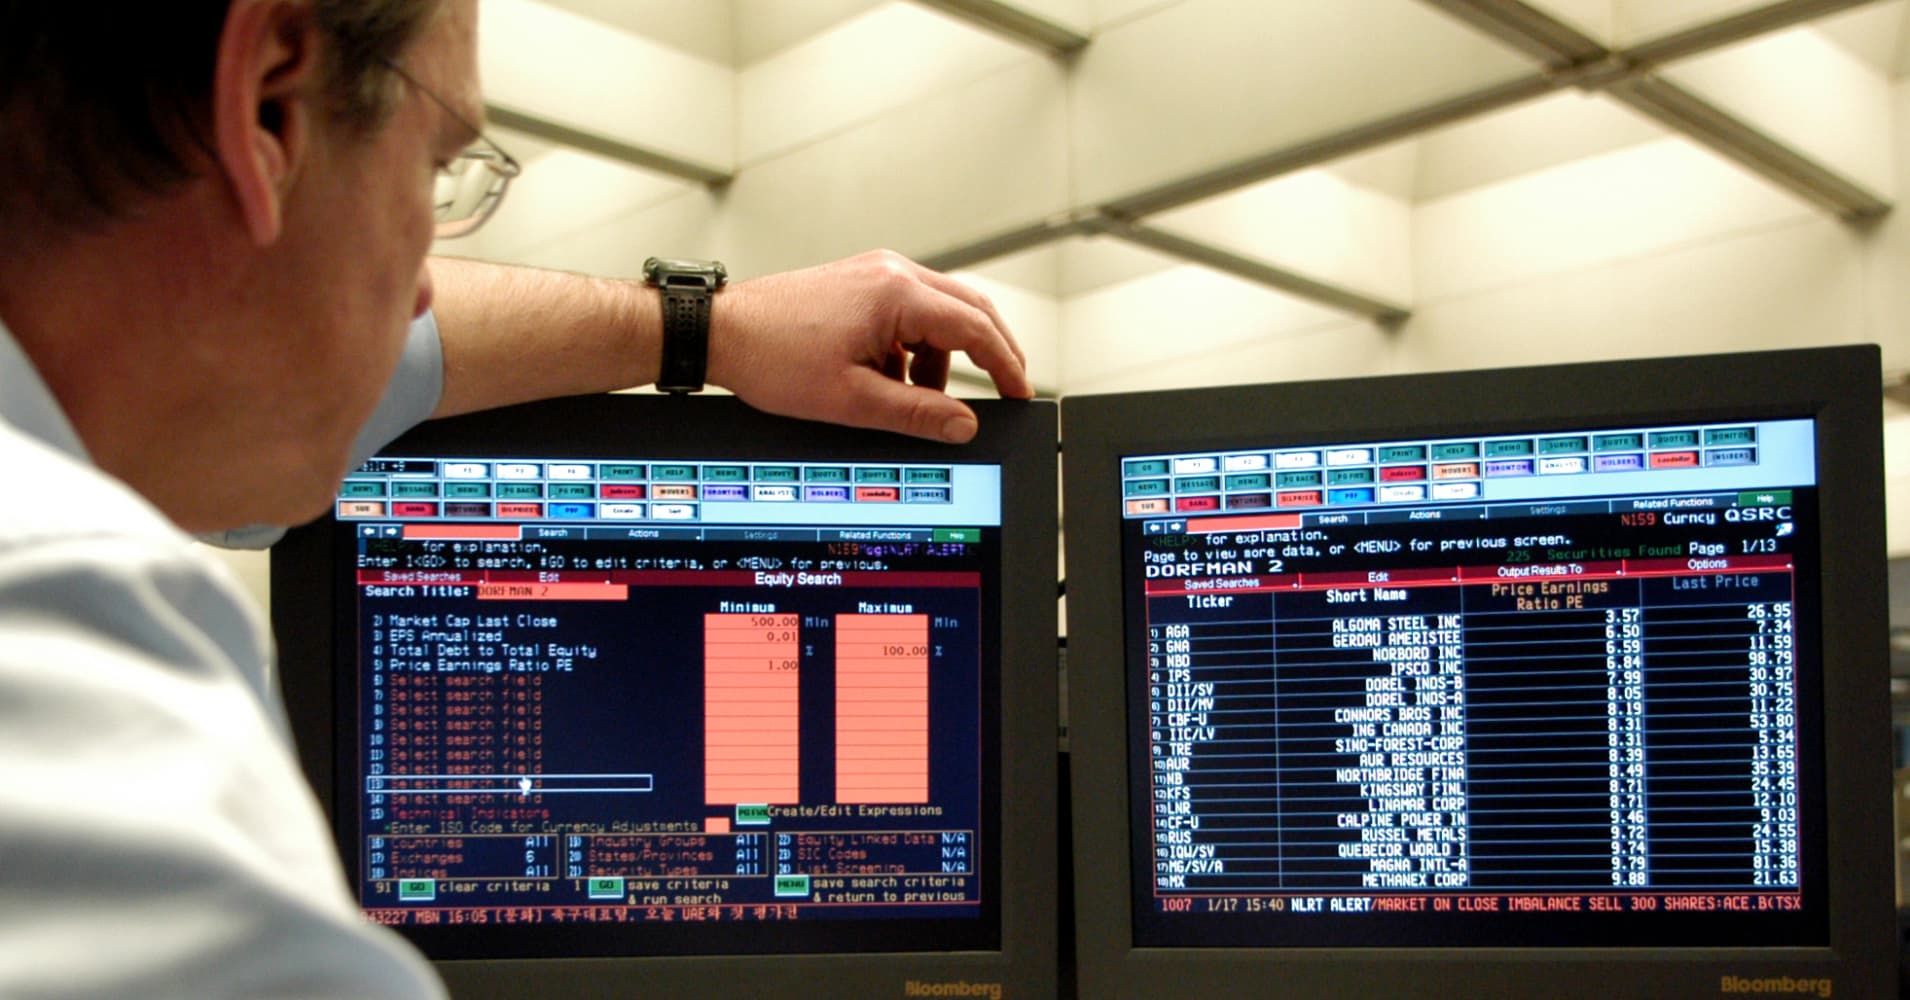 does bloomberg terminal require dtc settlement subscription